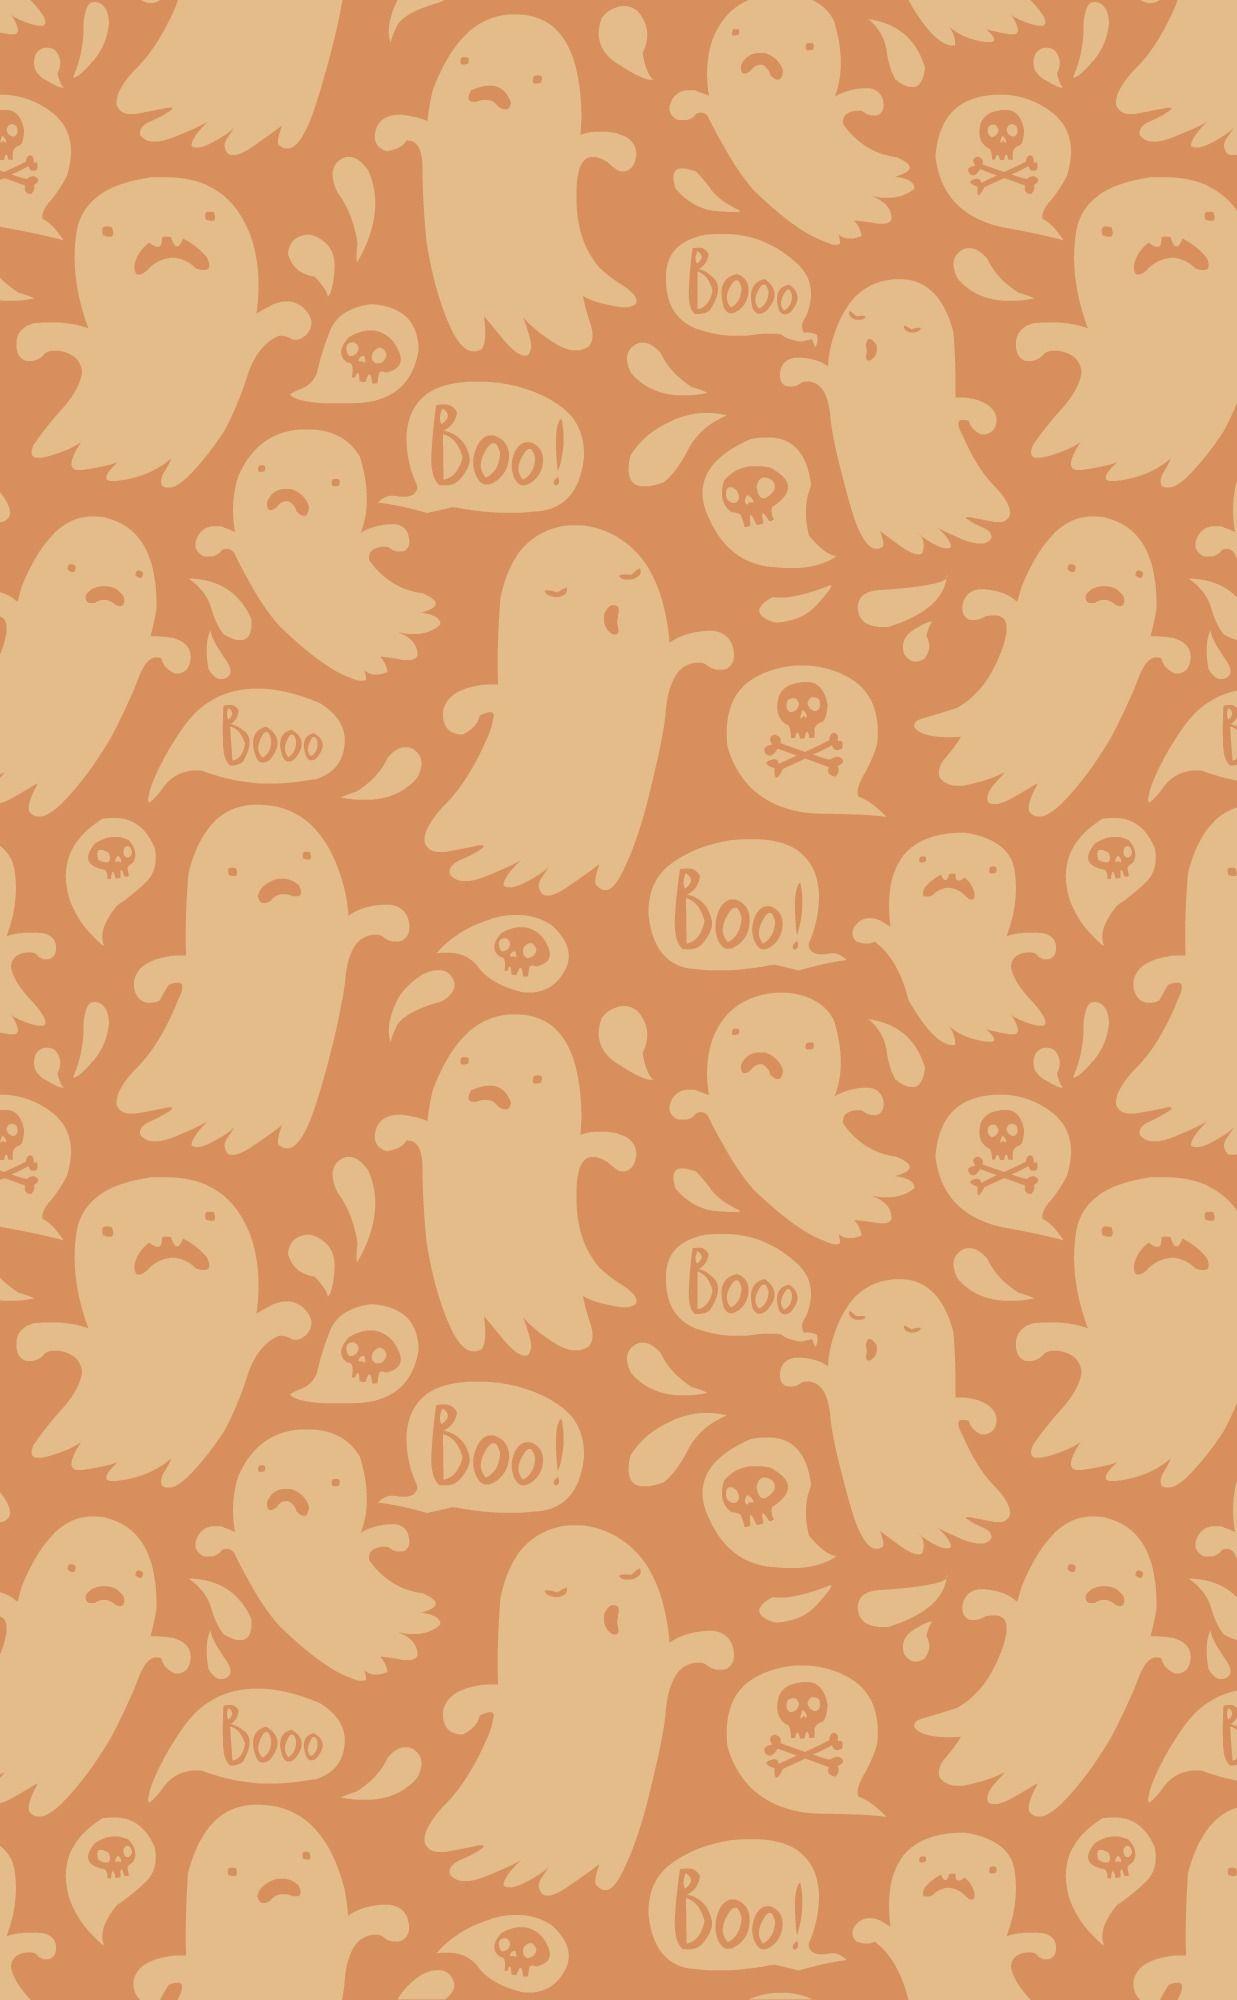 Silent and Scary iPhone 6 Halloween Wallpaper